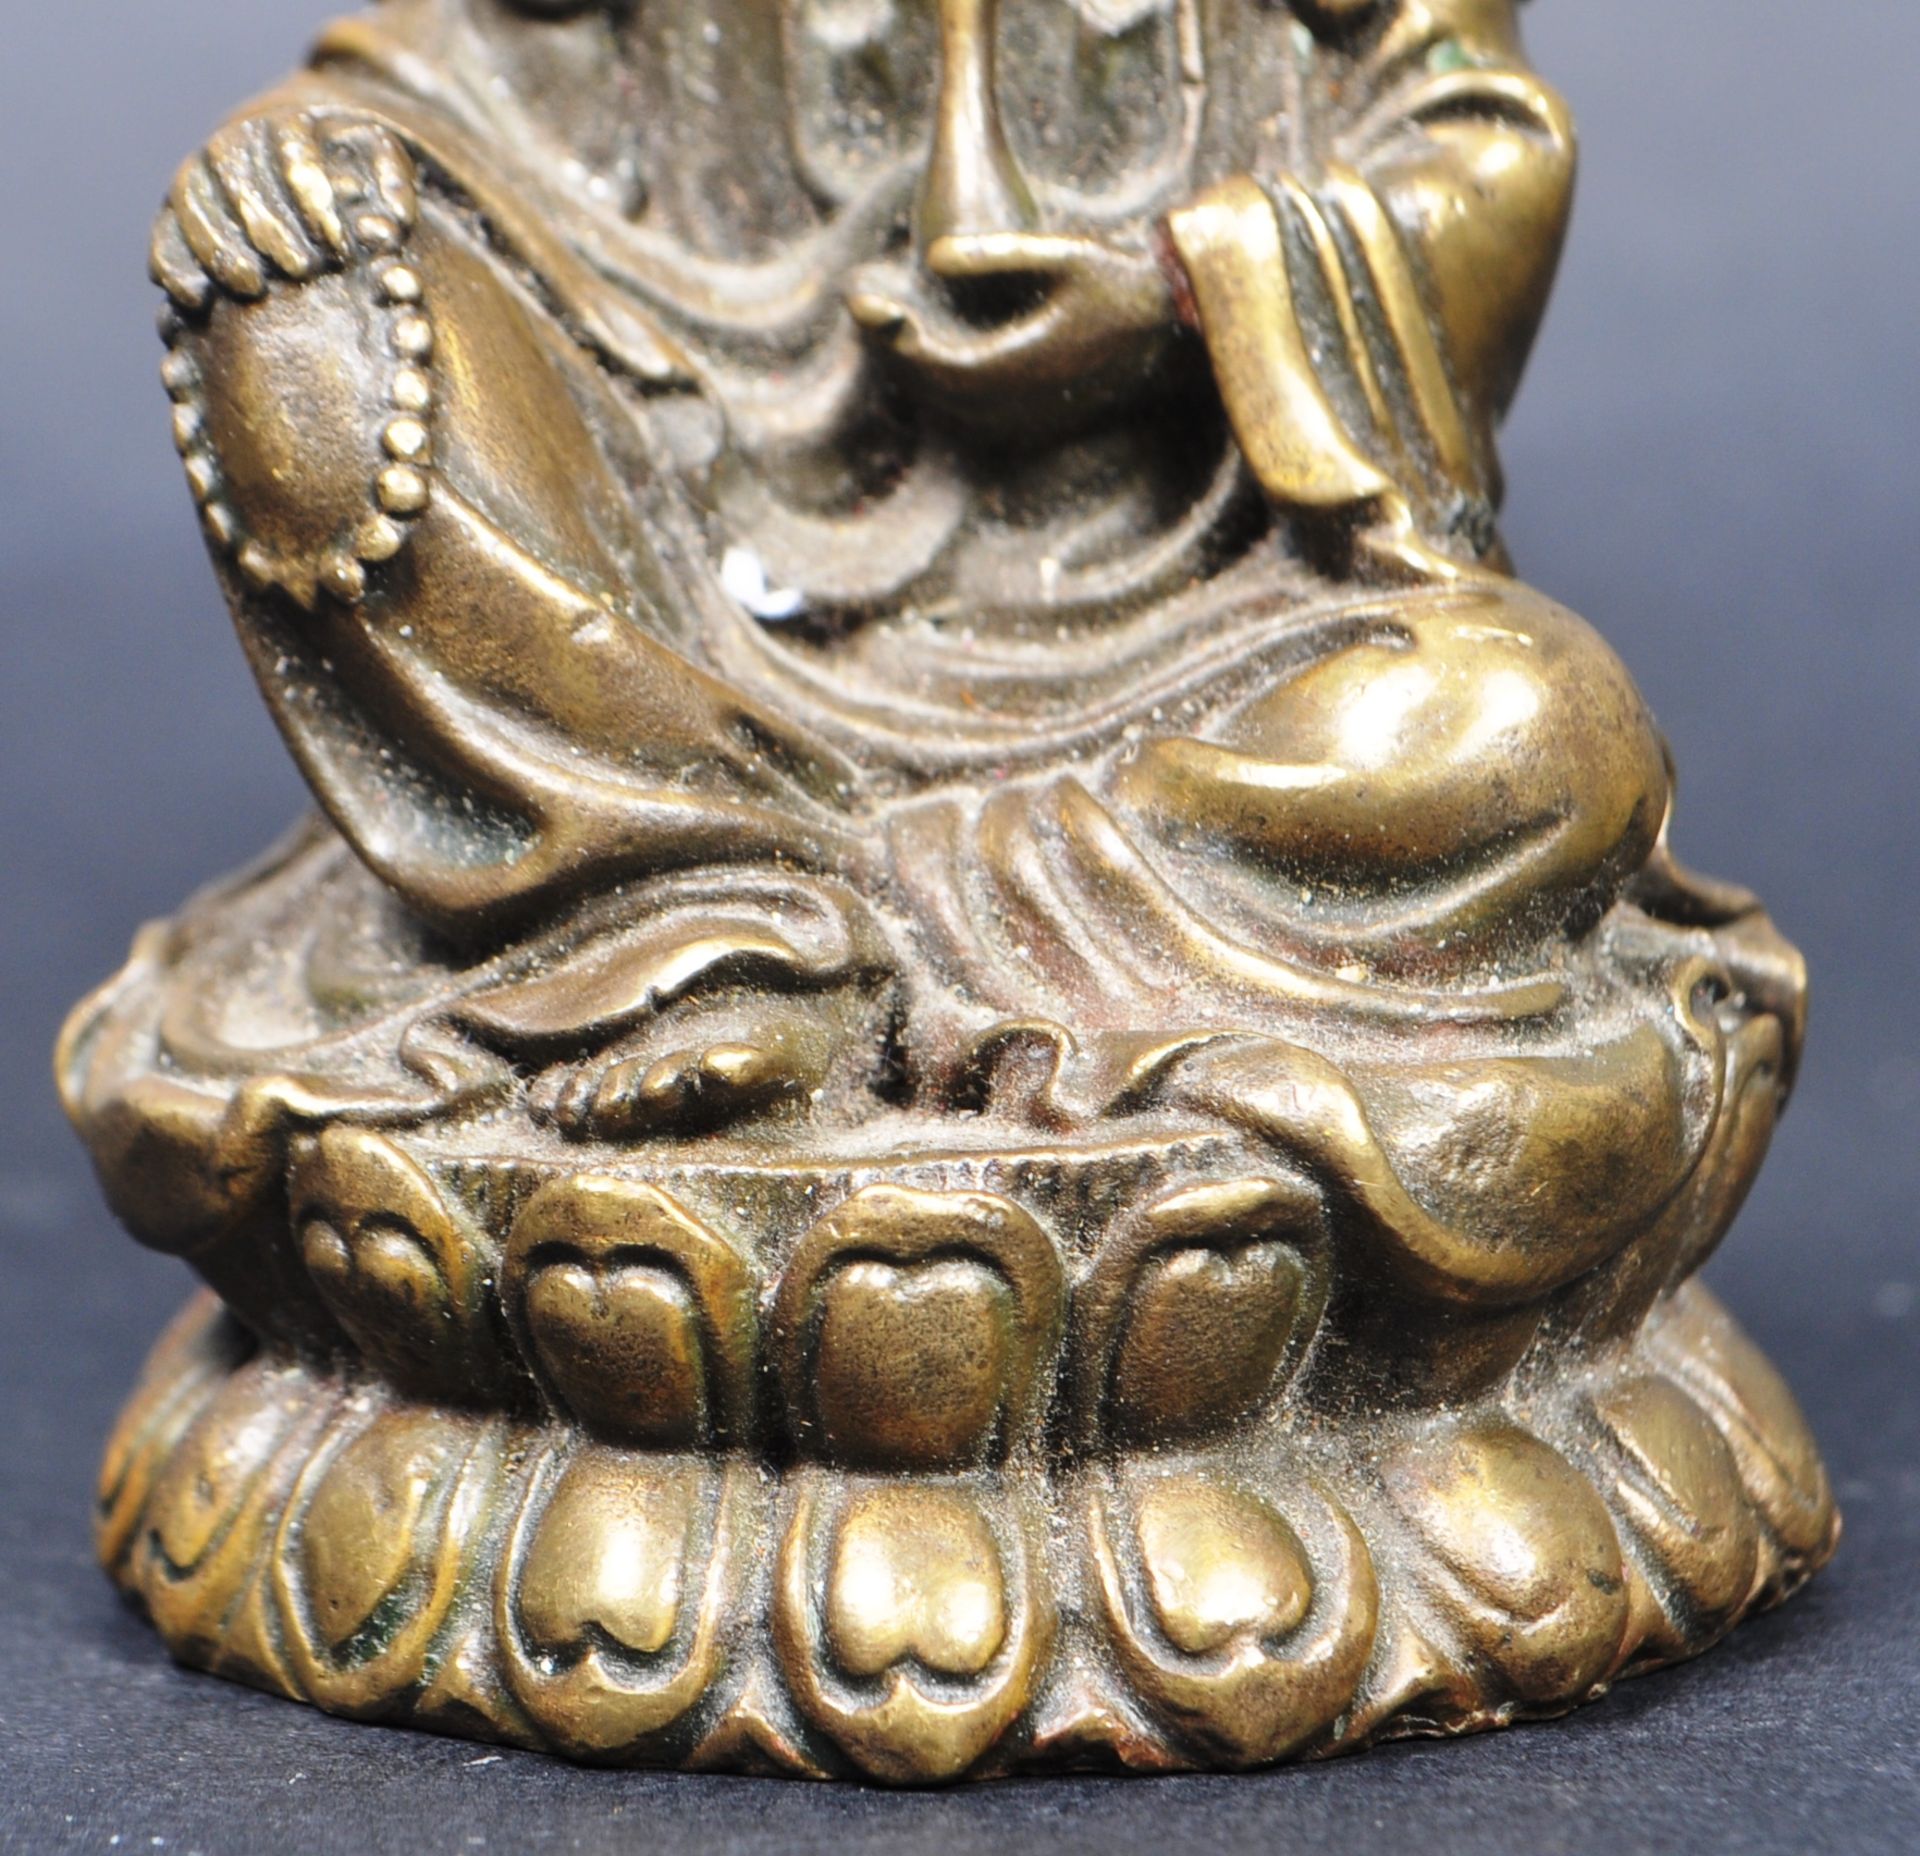 CHINESE REPUBLIC PERIOD BRONZE OF GUANYIN - Image 4 of 8